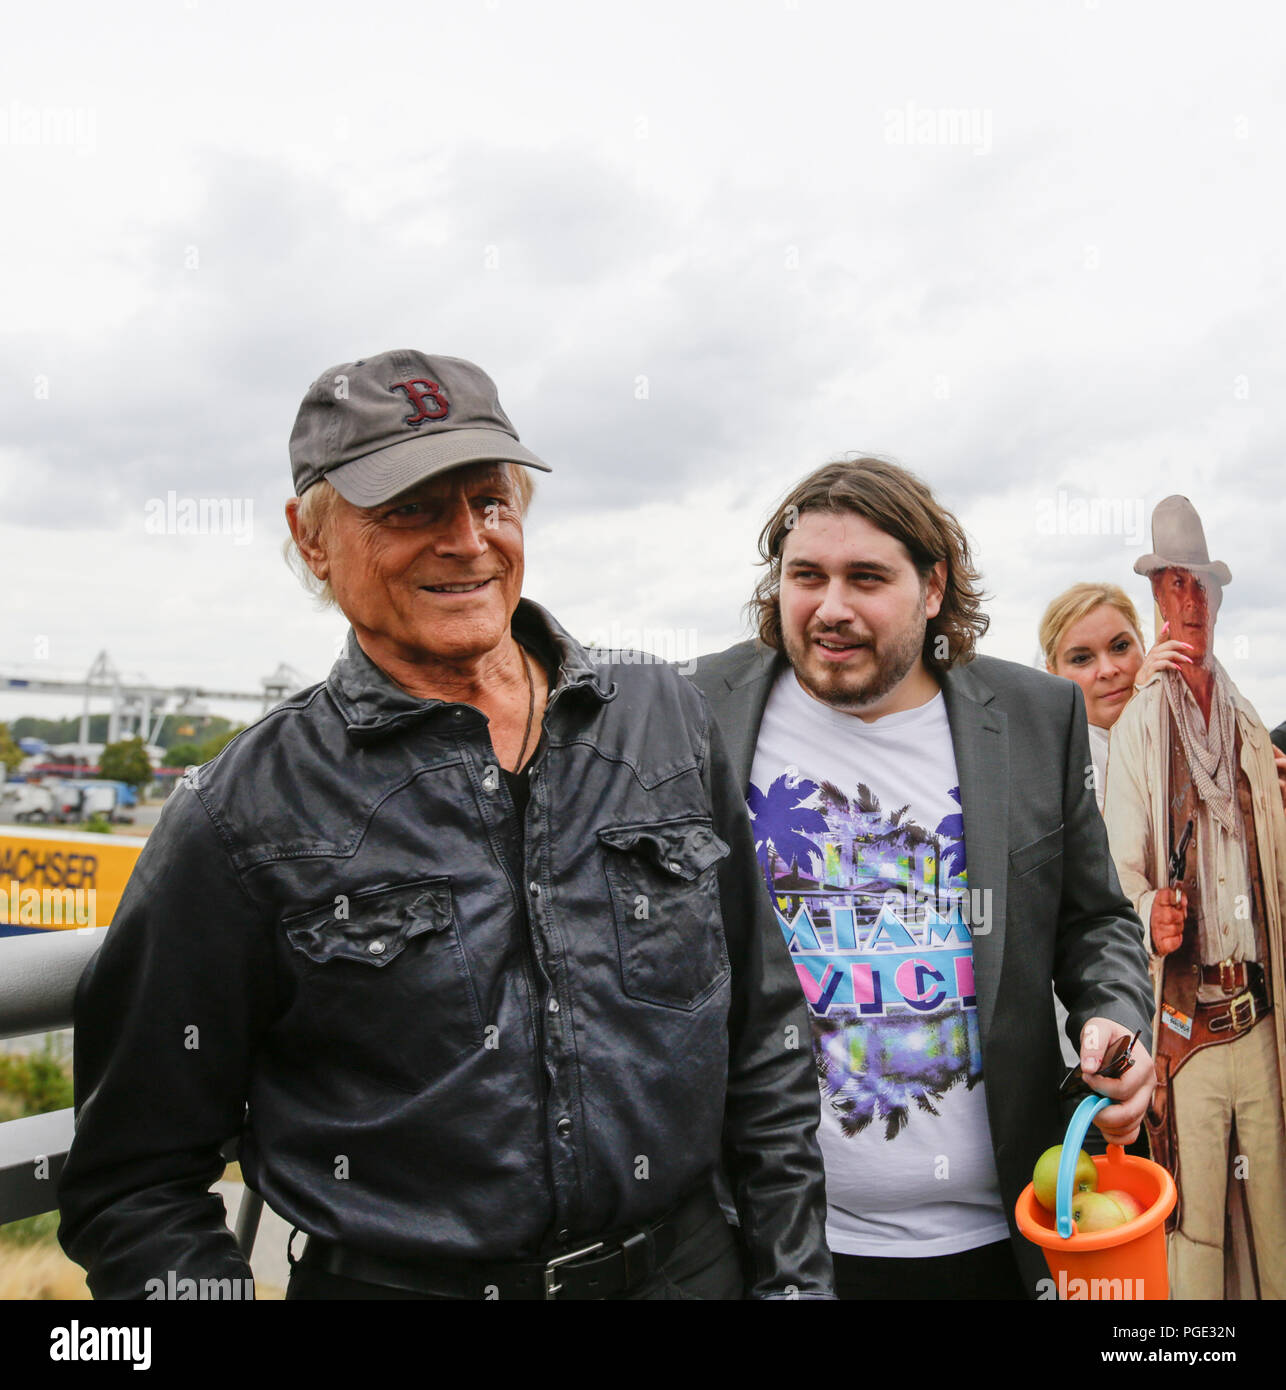 Worms, Germany. 24th Aug, 2018. Terence Hill (left) and actor Peter Englert (right), who initiated the renaming of the bridge to Terence-Hill-Bridge, are pictured on the bridge. Italian actor Terence Hill visited the German city of Worms, to present his new movie (My Name is somebody). Terence Hill added the stop in Worms to his movie promotion tour in Germany, to visit a pedestrian bridge, that is unofficially named Terence-Hill-Bridge (officially Karl-Kubel-Bridge). Credit: Michael Debets/Pacific Press/Alamy Live News Stock Photo